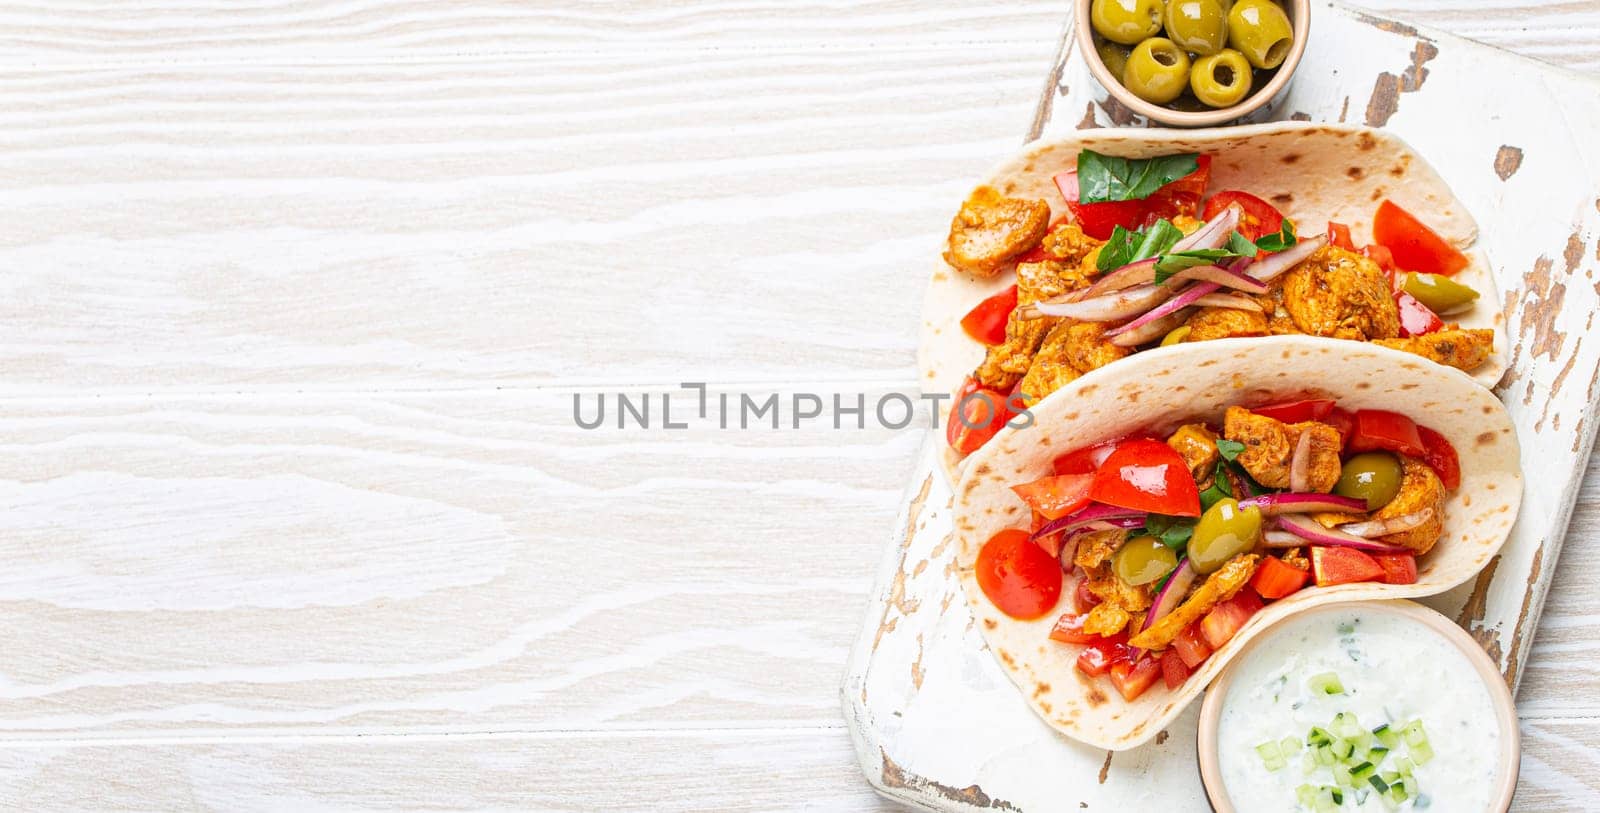 Traditional Greek Dish Gyros: Pita bread Wraps with vegetables, meat, herbs, olives on rustic wooden cutting board with Tzatziki sauce, olive oil top view on white wooden background, space for text. by its_al_dente